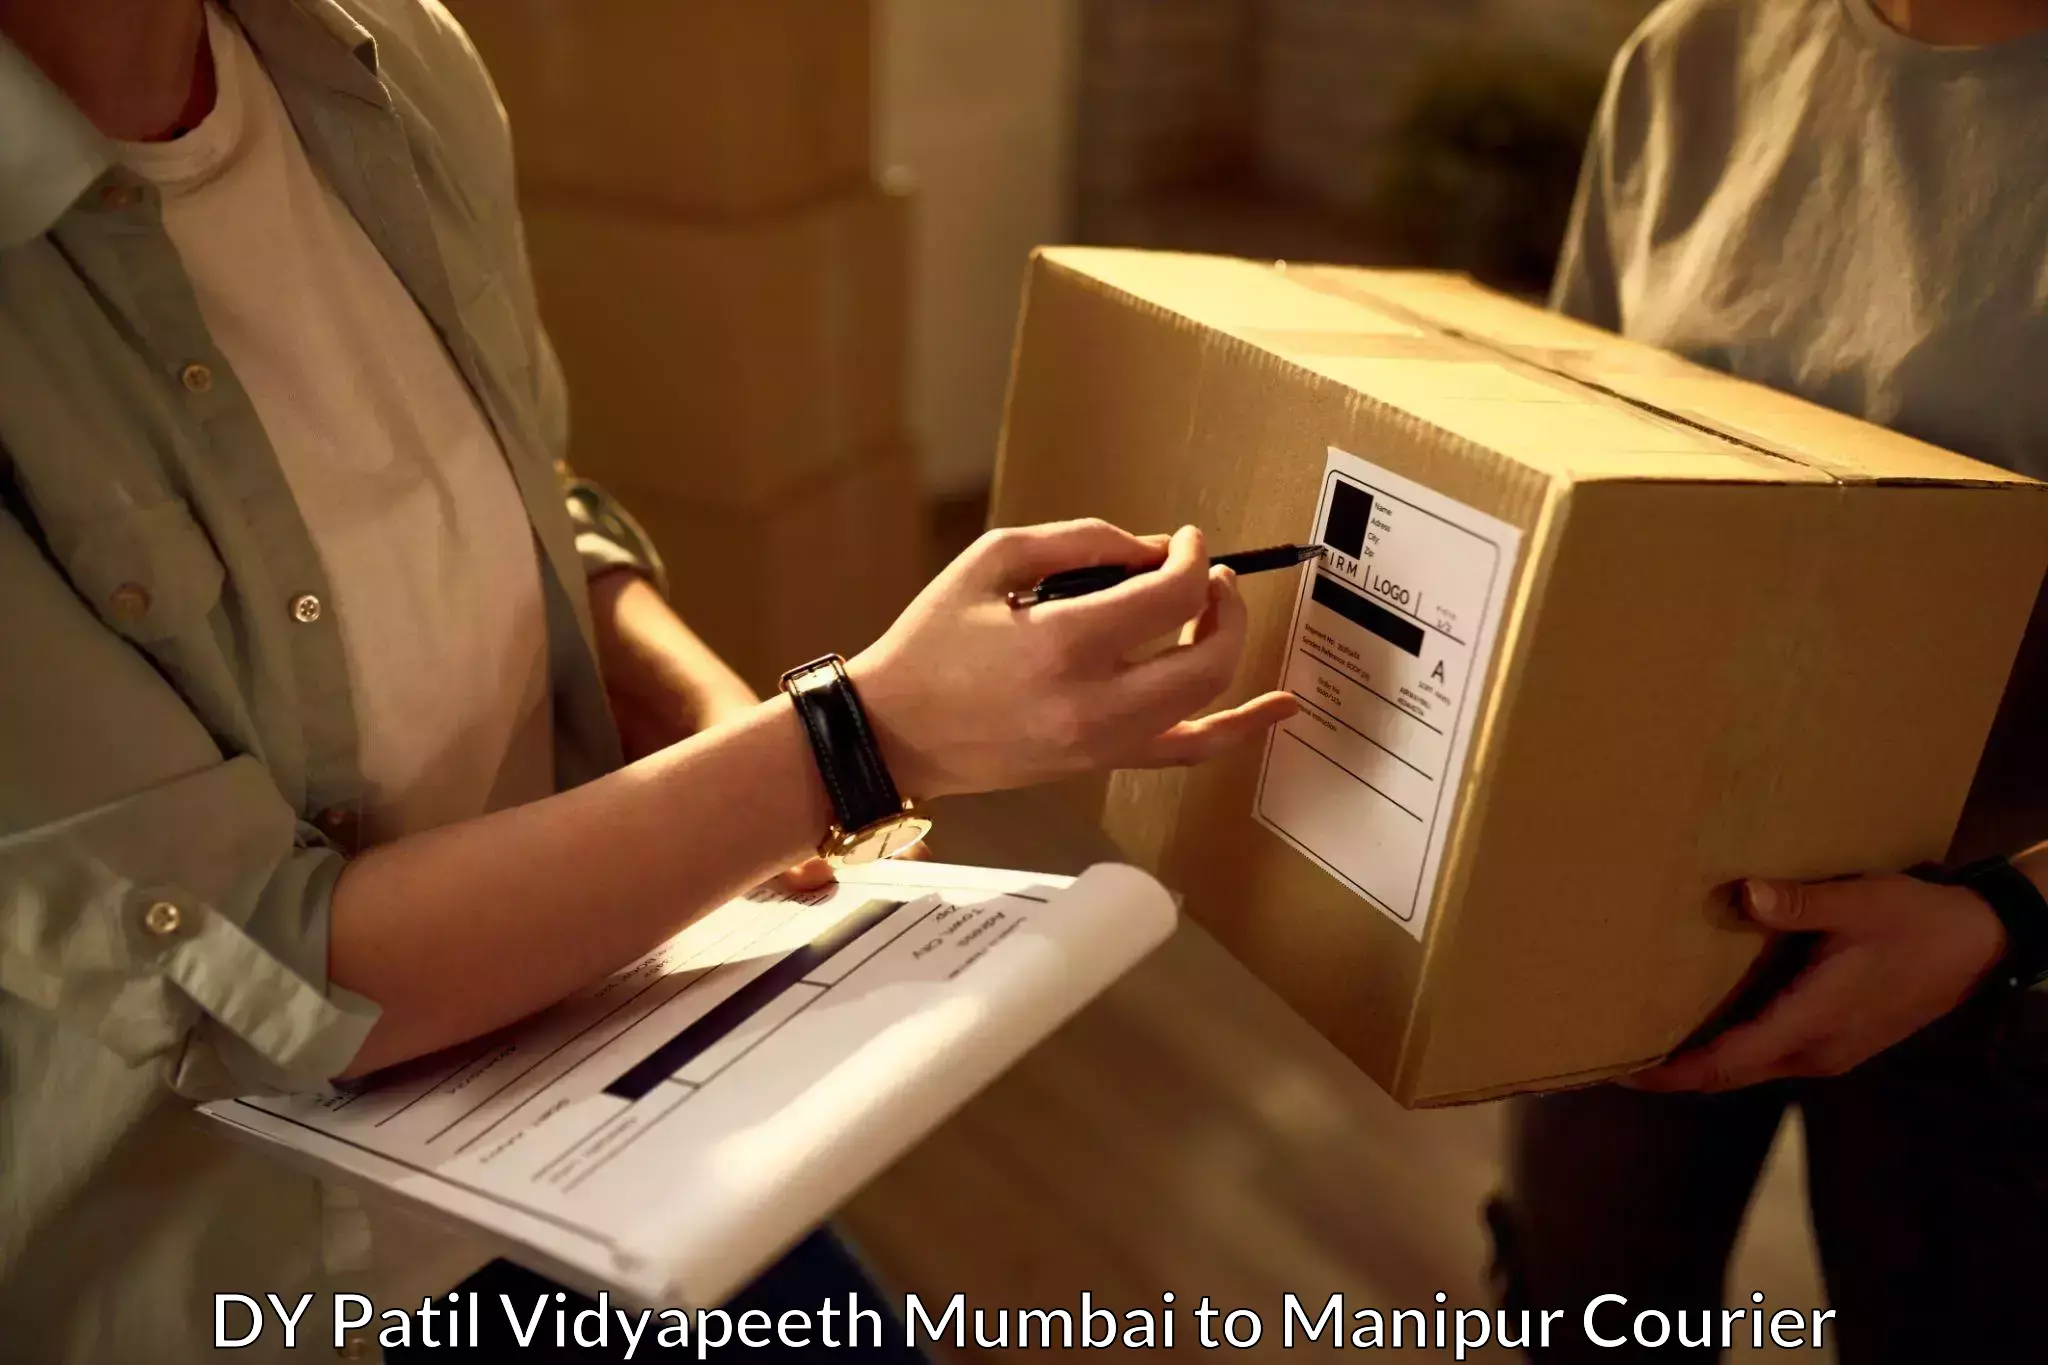 Global delivery options DY Patil Vidyapeeth Mumbai to Manipur